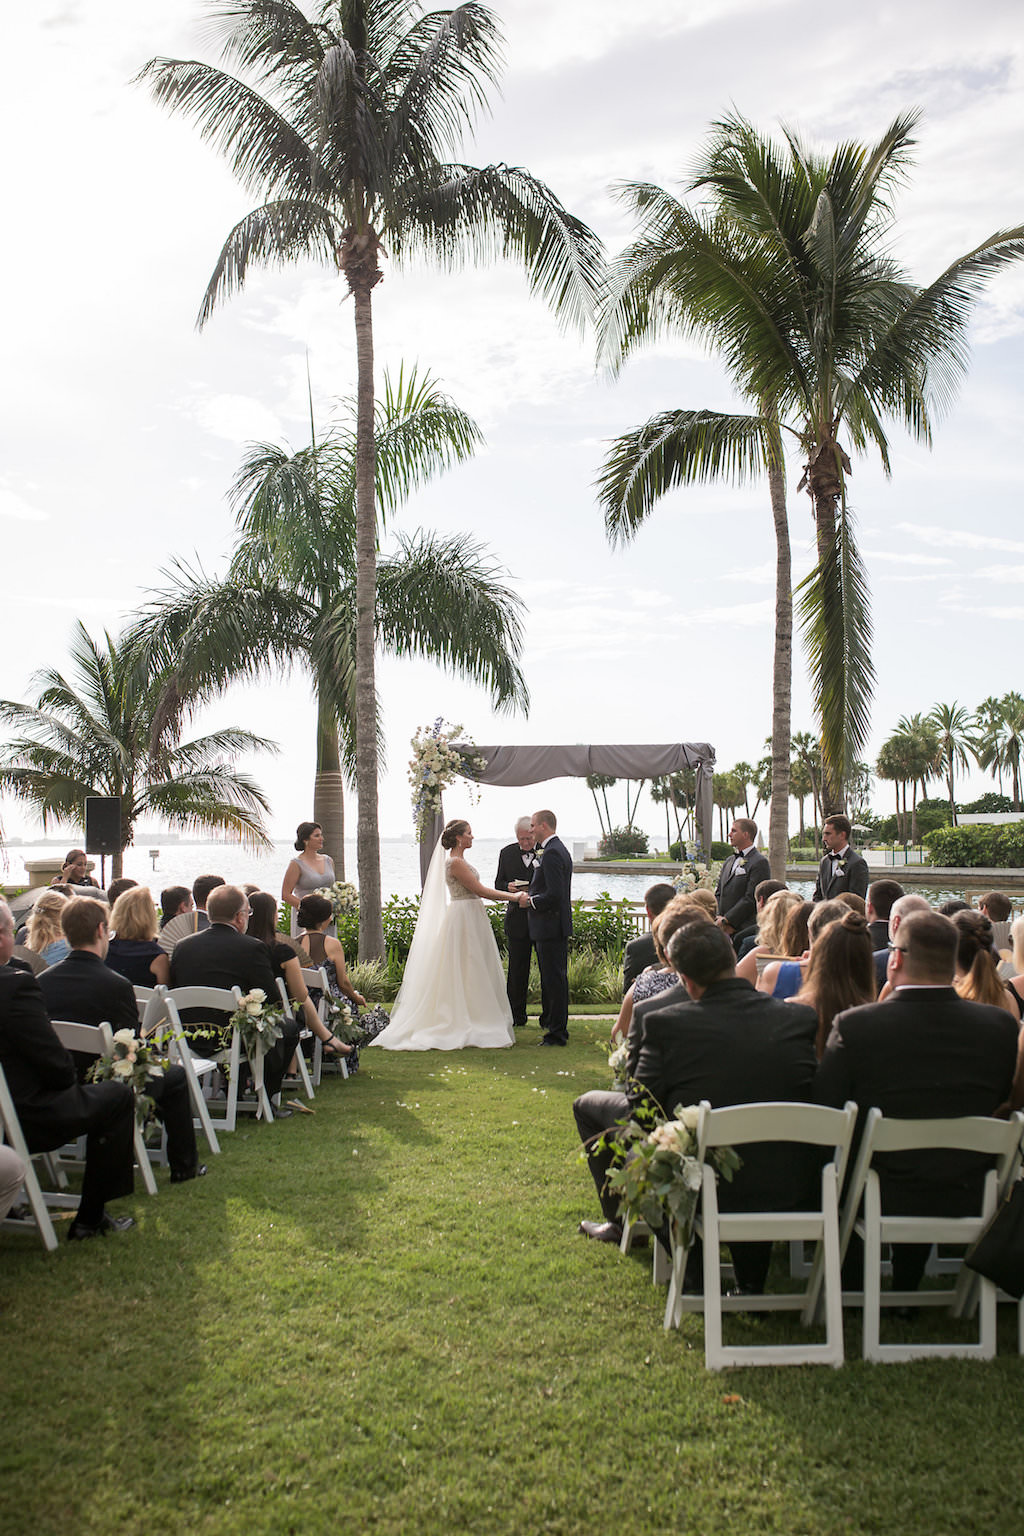 Outdoor Waterfront Downtown Hotel Wedding Ceremony Portrait with White Folding Chairs, Gray Silk Draped Ceremony Arch with White Florals | Sarasota Wedding Venue The Ritz Carlton | Tampa Bay Photographer Cat Pennenga Photography